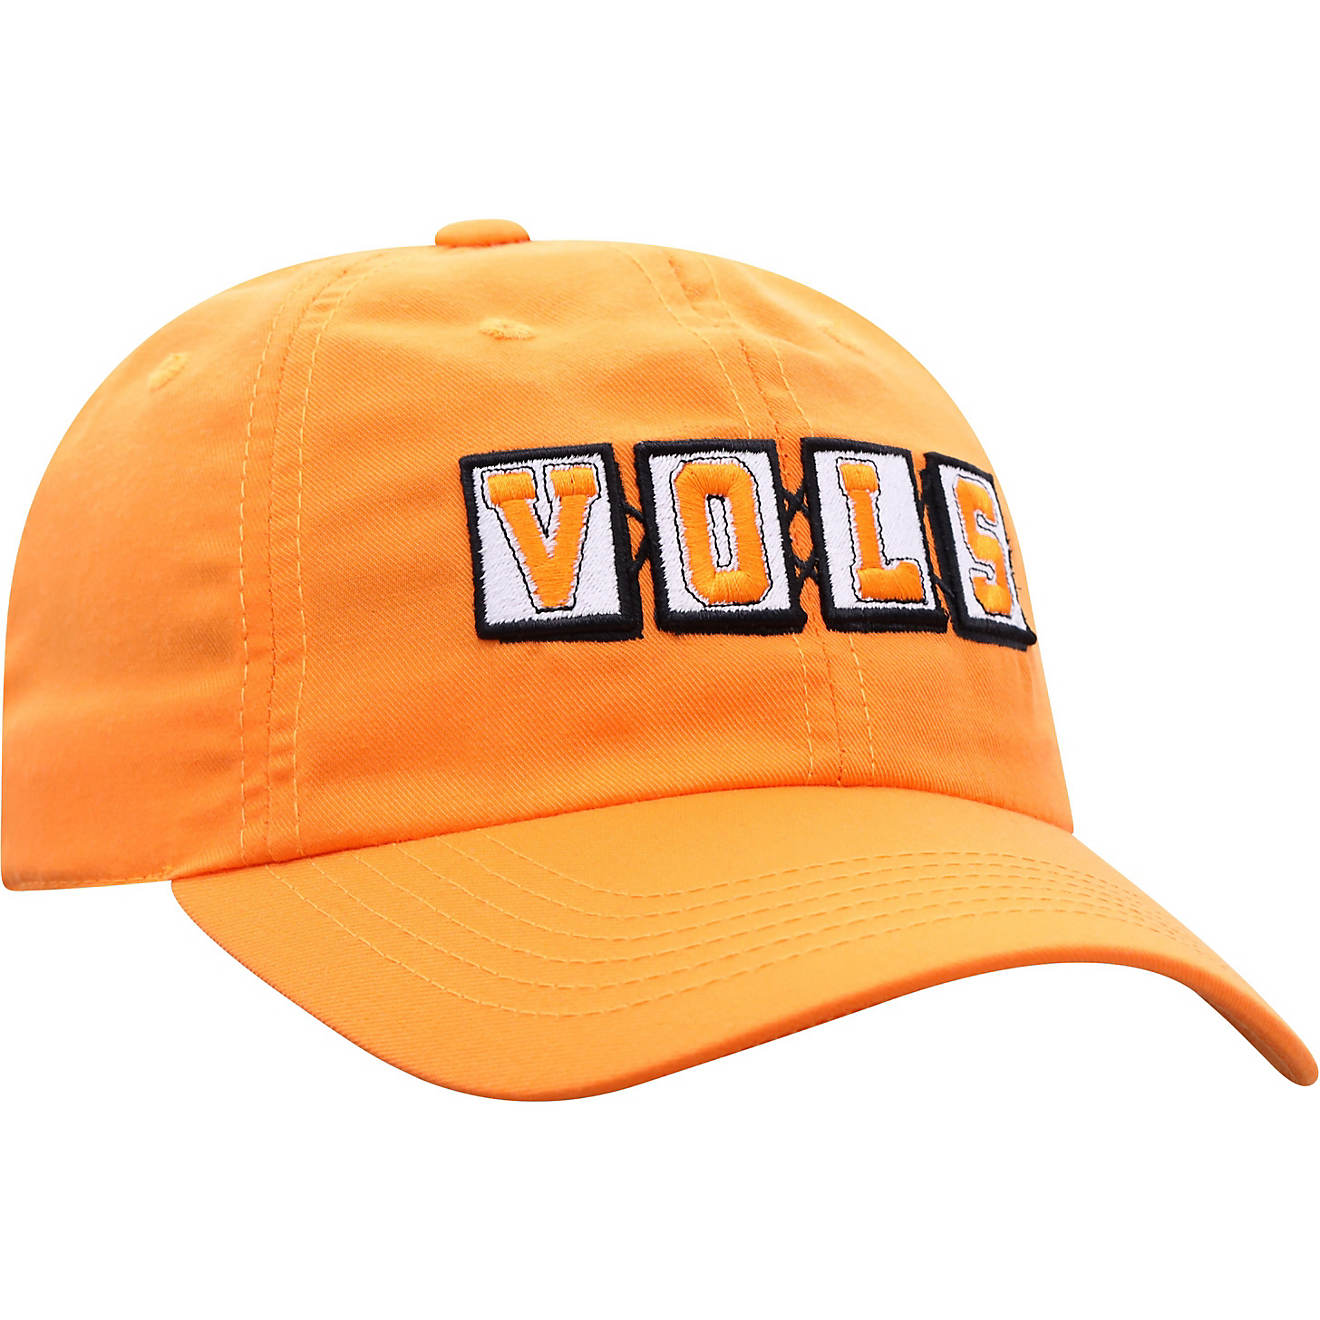 Top of the World University of Tennessee Neyland 100 Staple Adjustable Cap                                                       - view number 1